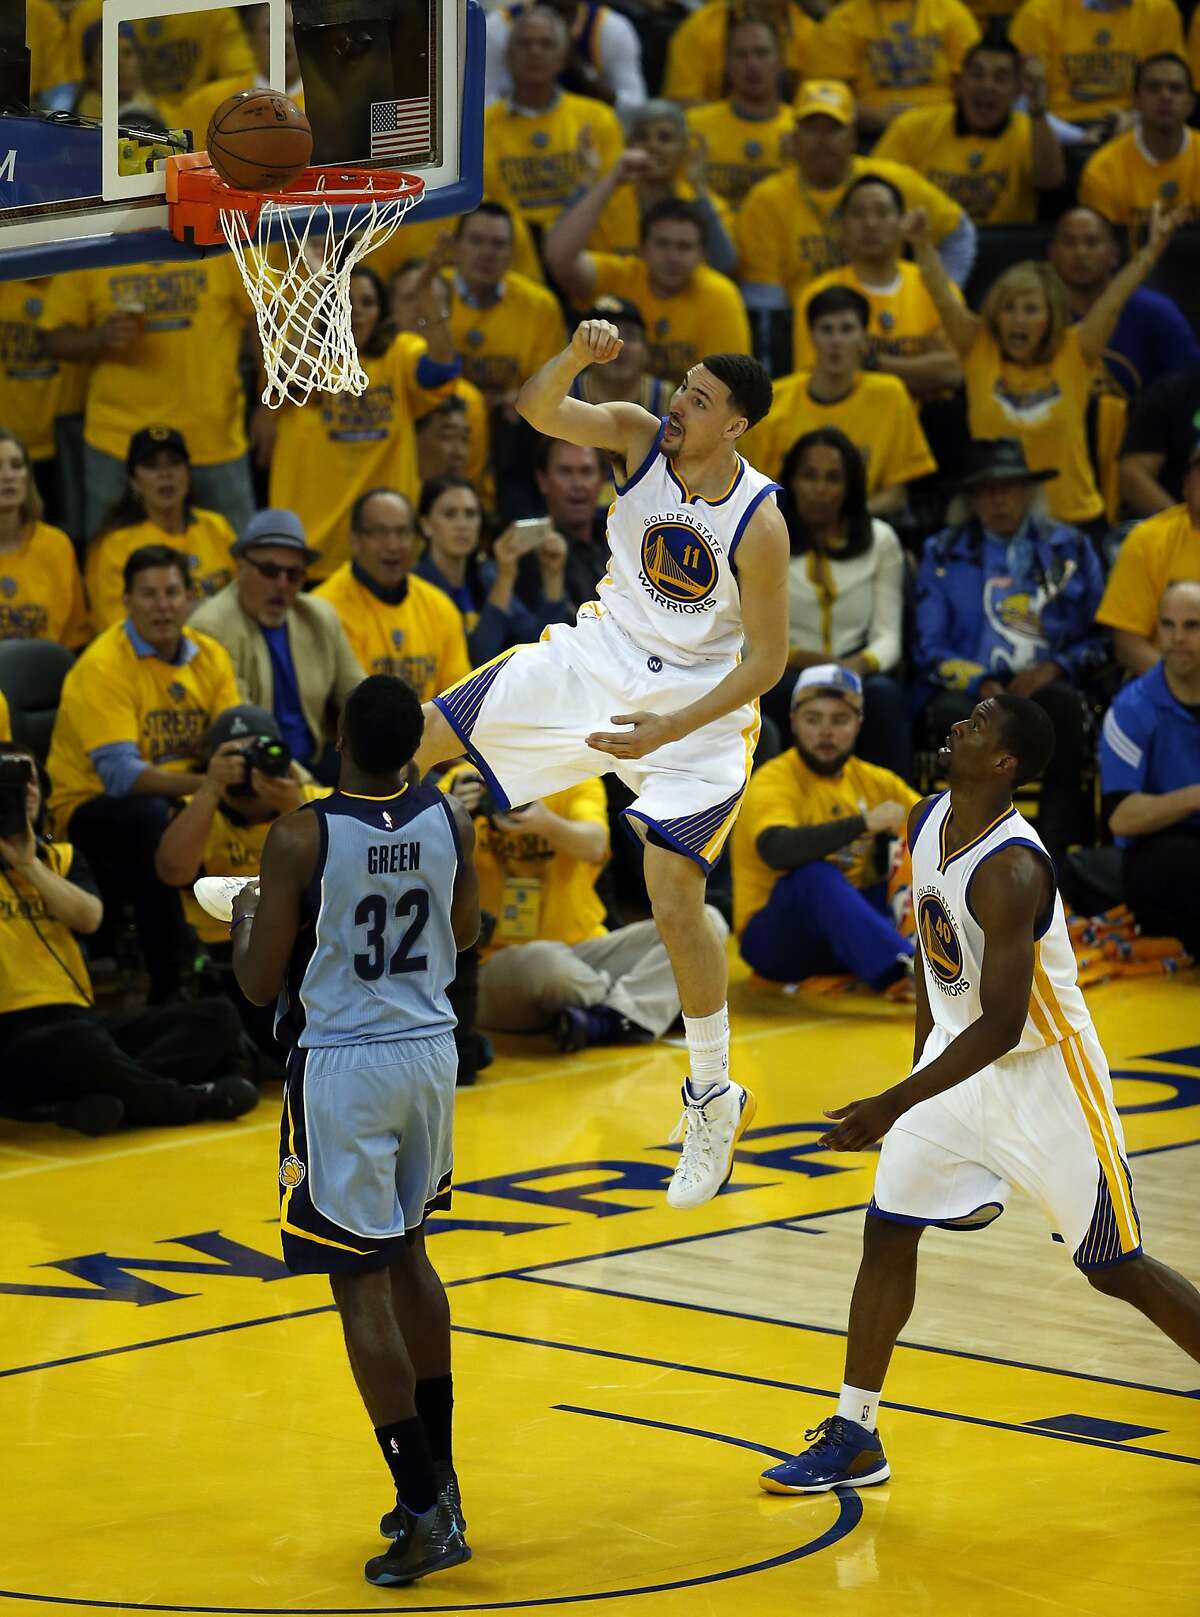 Golden State Warriors' Klay Thompson misses a dunk in 2nd quarter against Memphis Grizzlies' Jeff Green during Game 2 of NBA Playoffs' Western Conference Semifinals at Oracle Arena in Oakland, Calif., on Tuesday, May 5, 2015.